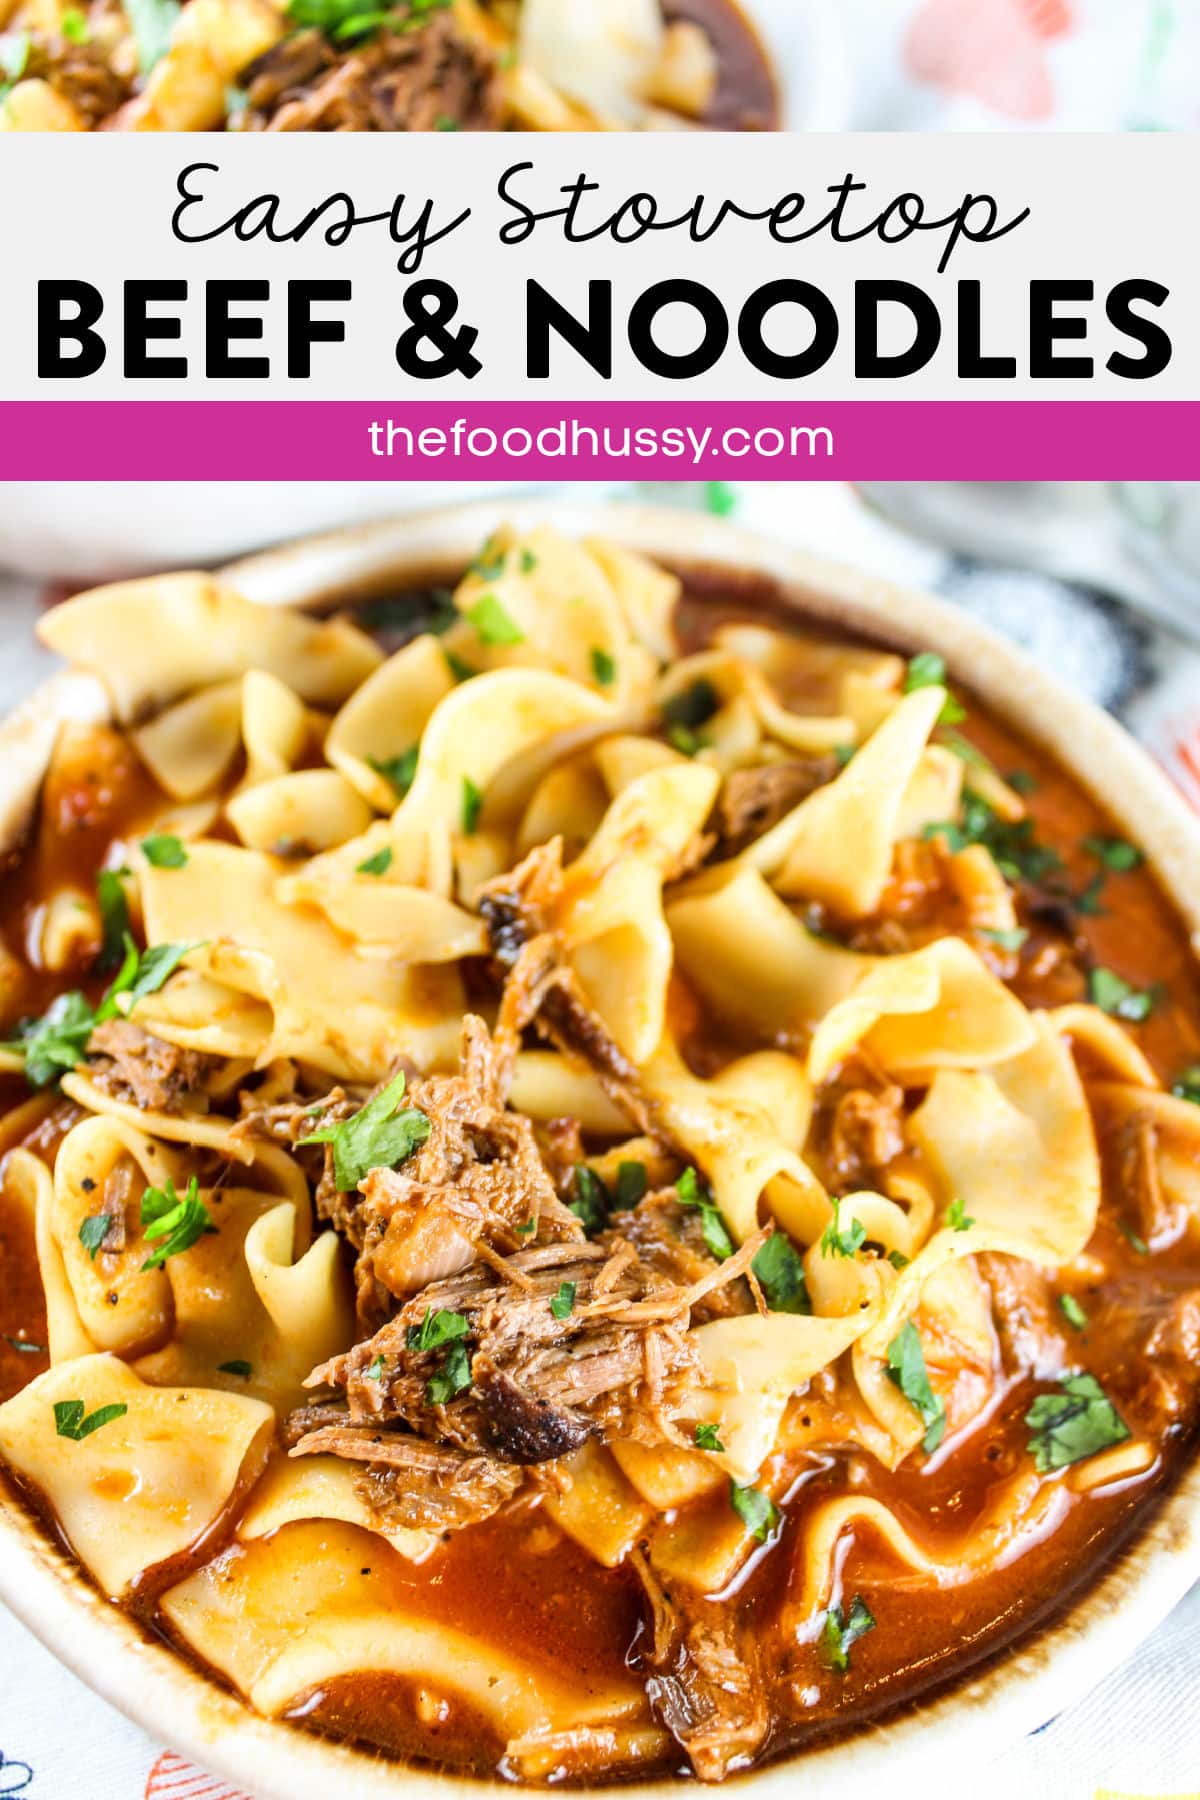 These Easy Stovetop Beef & Noodles are comfort food at its best! Chock full of tender shredded beef, egg noodles and a rich tomato sauce - it tastes just like your grandma used to make! via @foodhussy